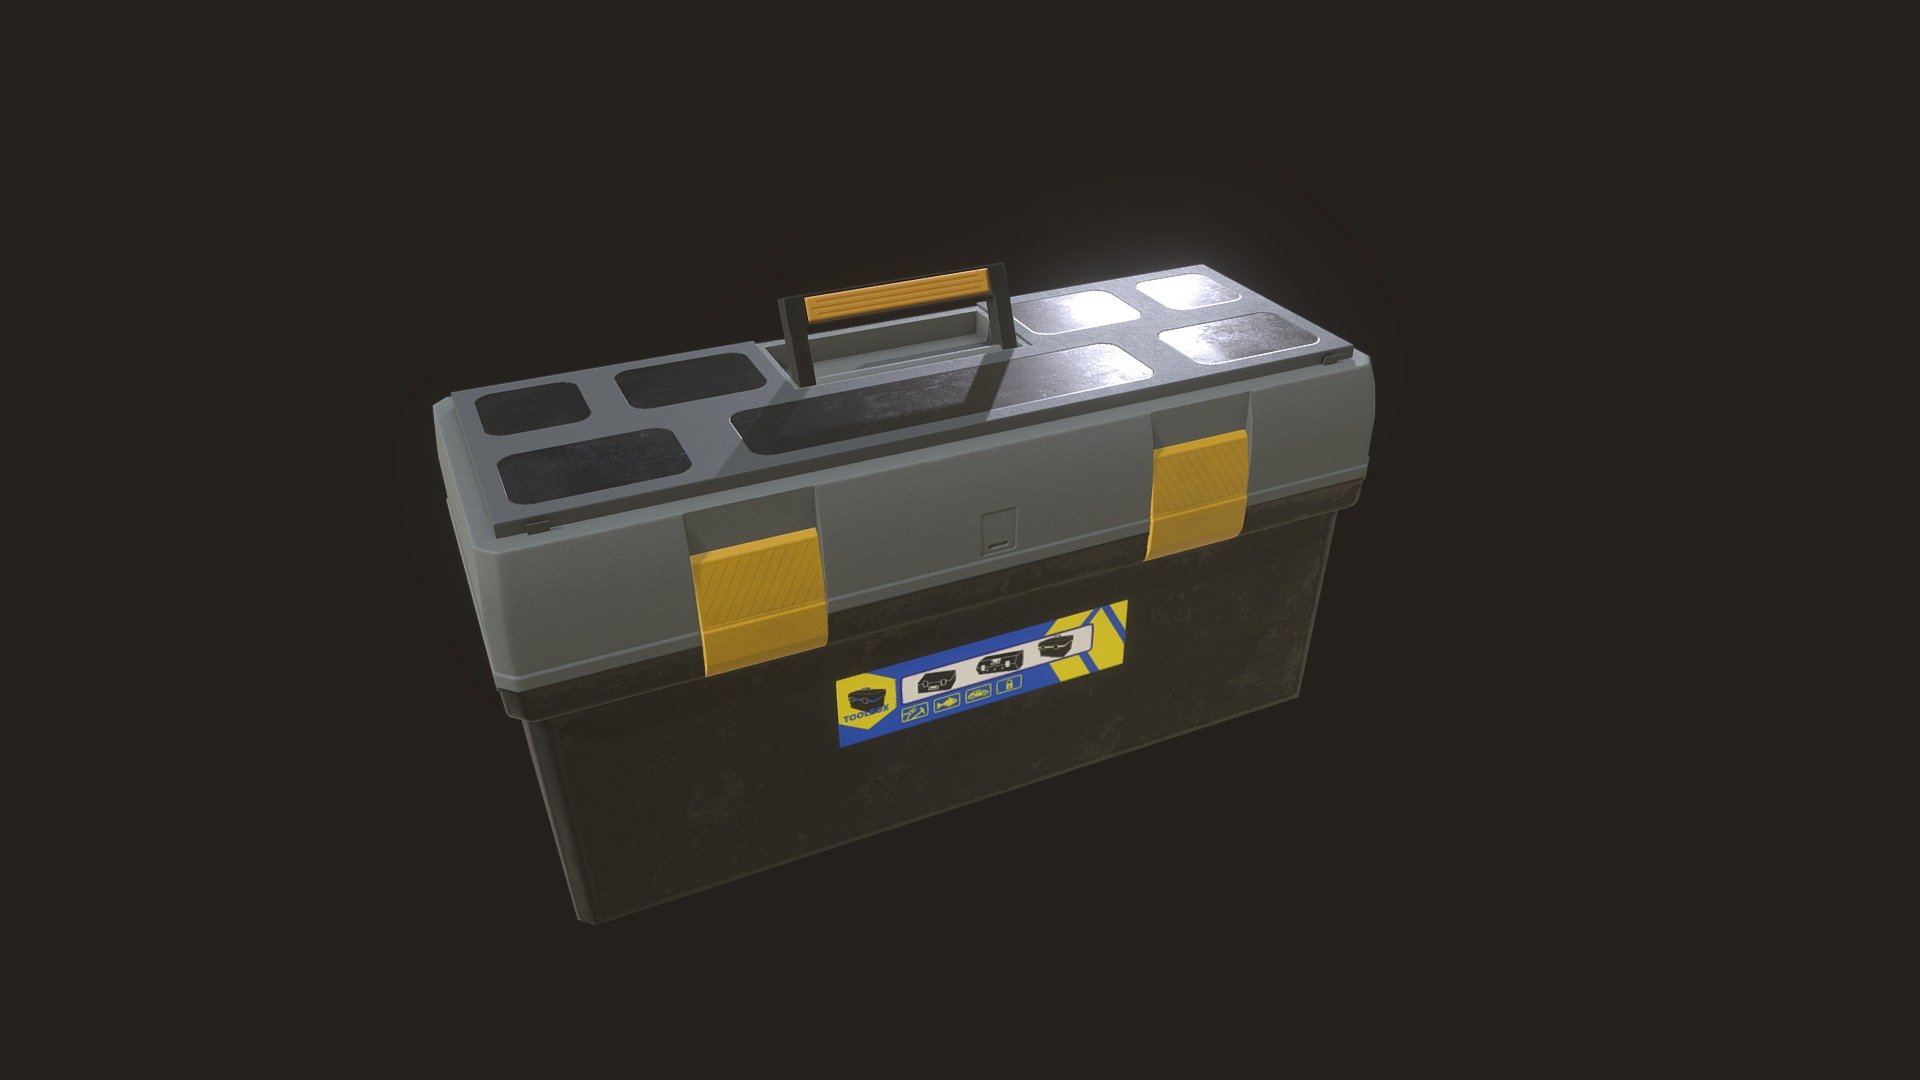 Low-poly Toolbox for &lsquo;untiy' game engine. 
Modelled in &lsquo;Cinema4d', texture maps created with &lsquo;Quixel suite' 3d model